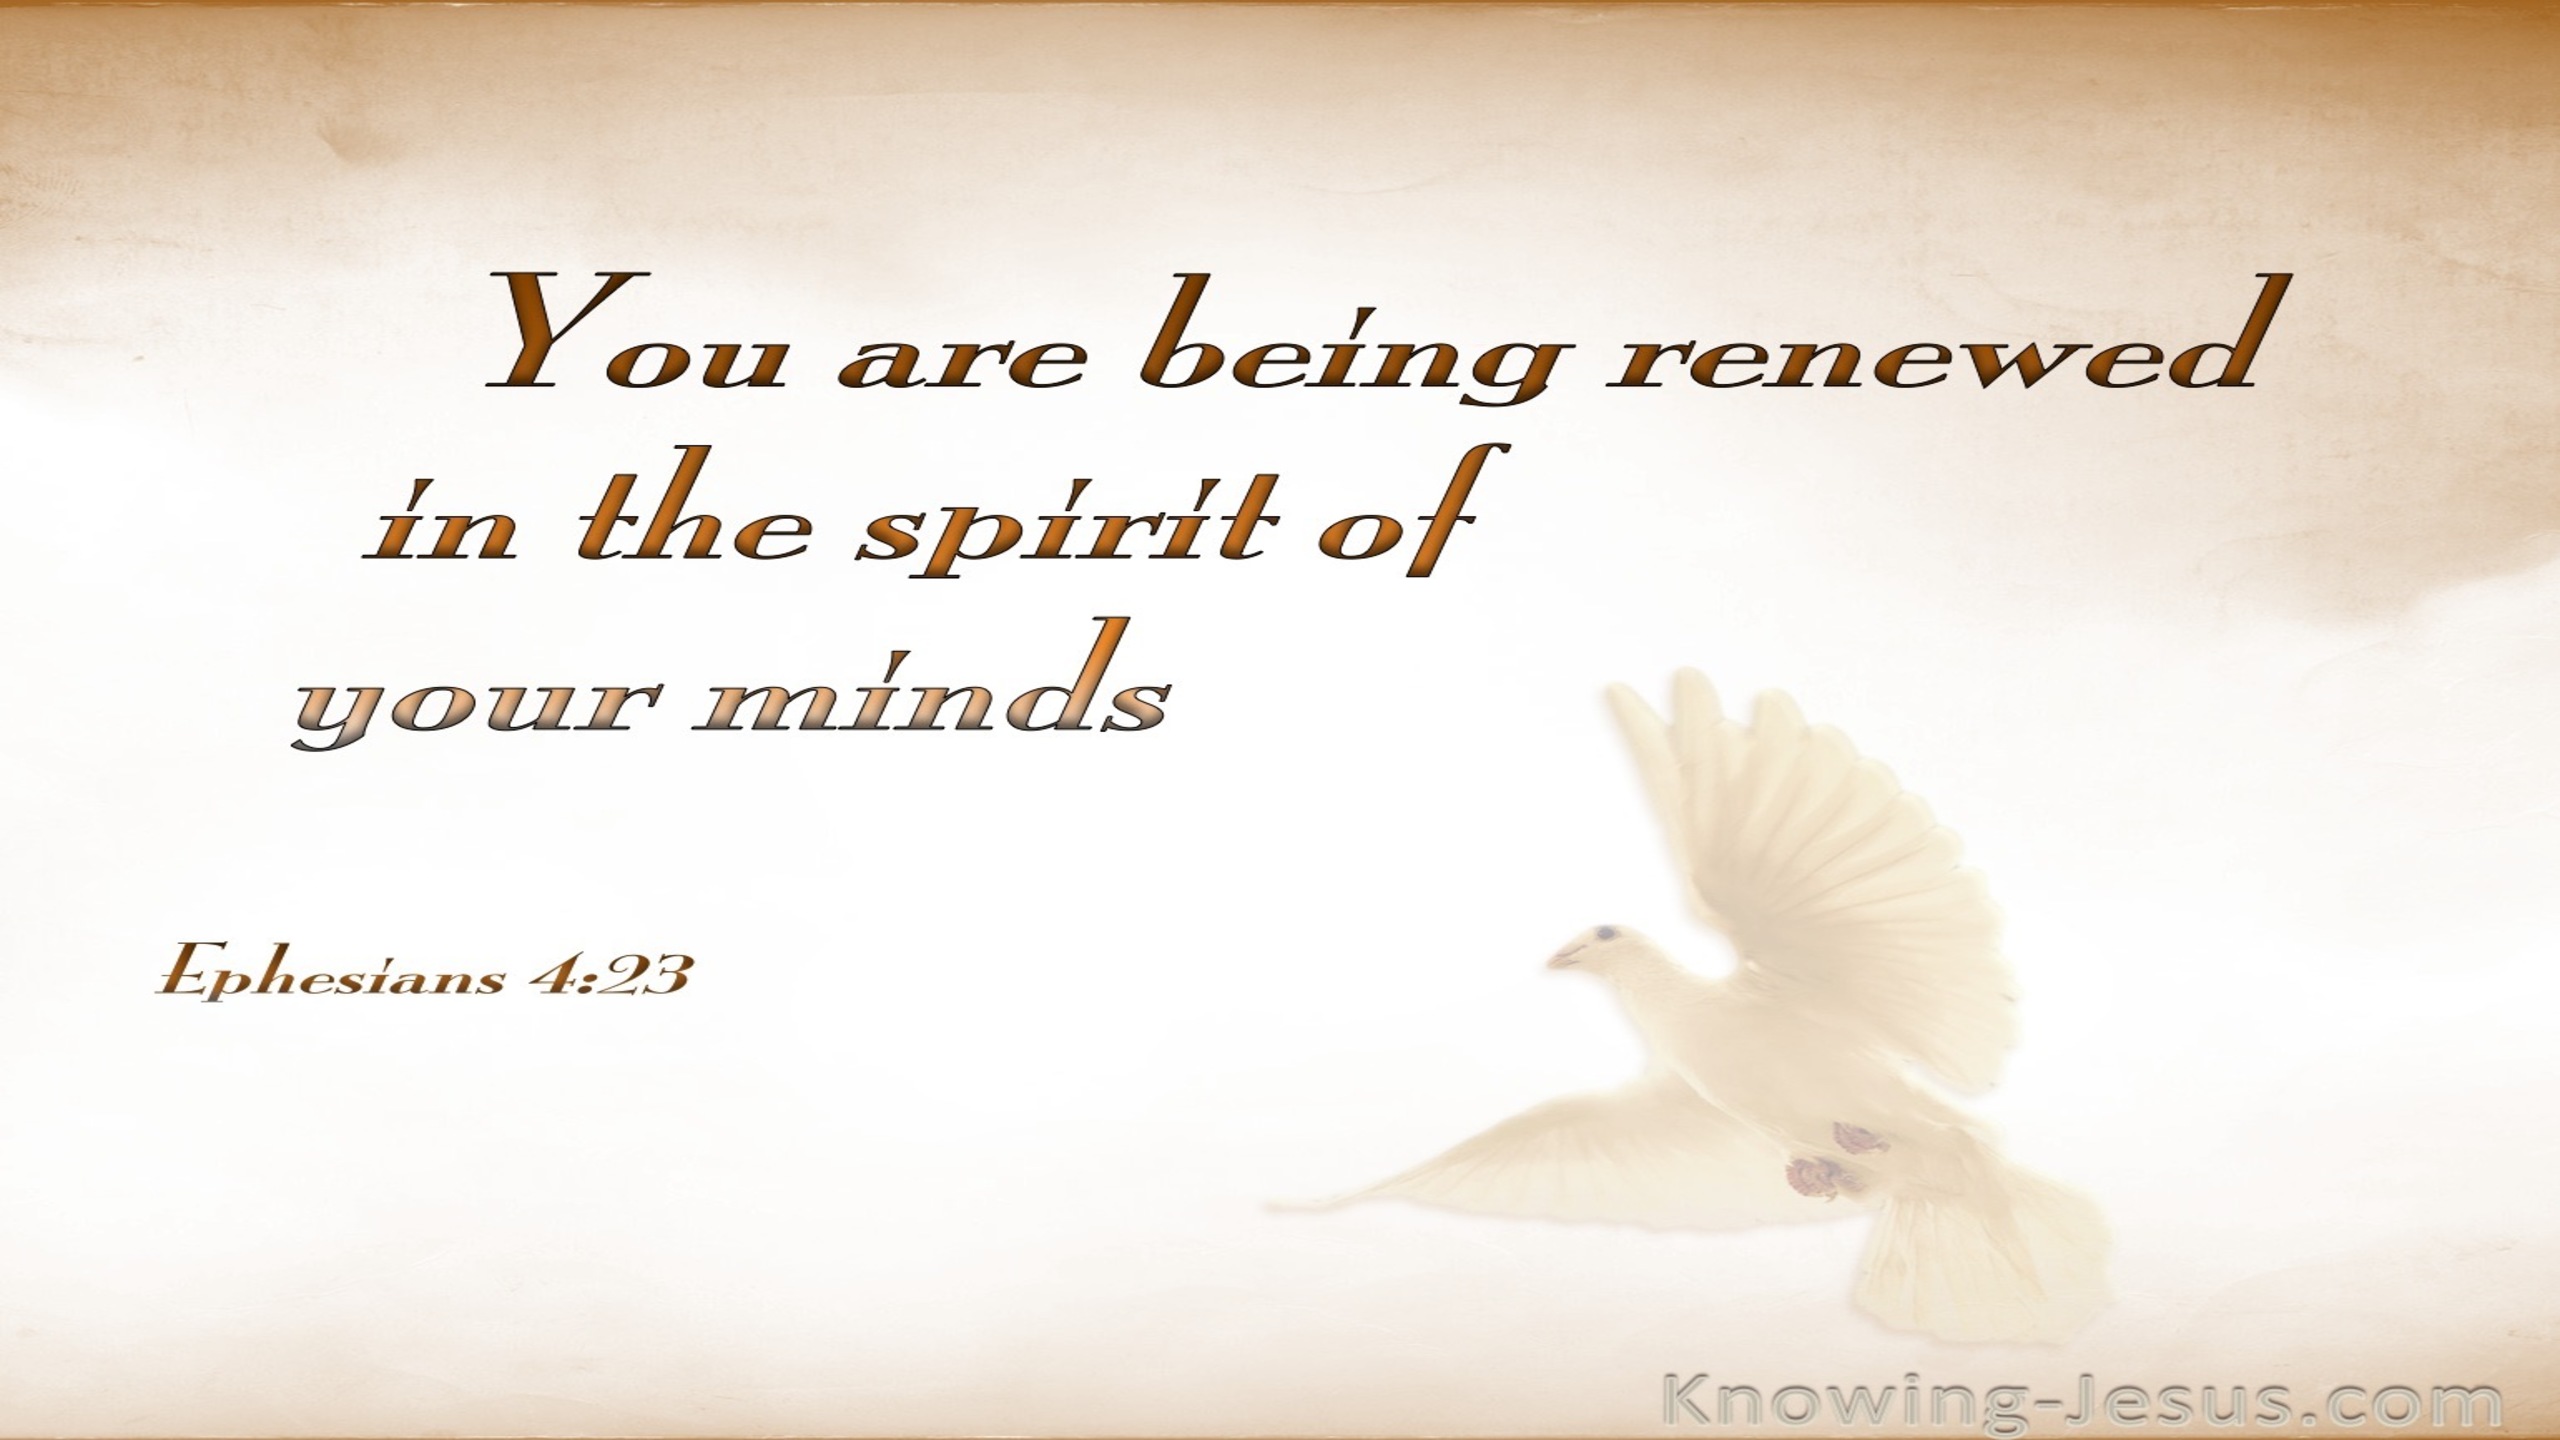 Ephesians 4:23 Being Renewed In The Spirit of Your Minds (beige)